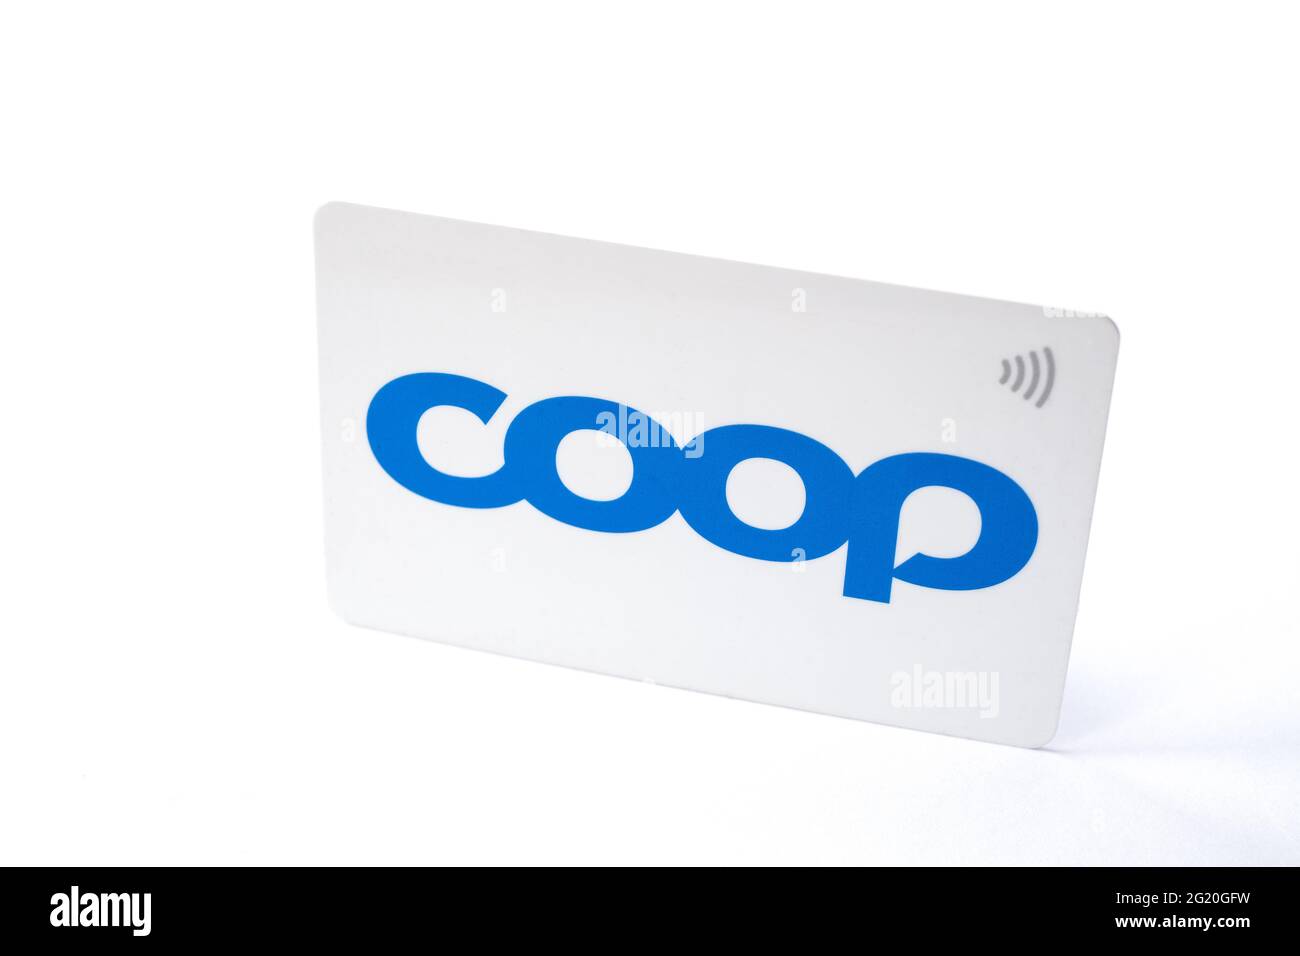 Coop shops wireless client savings card. Stock Photo